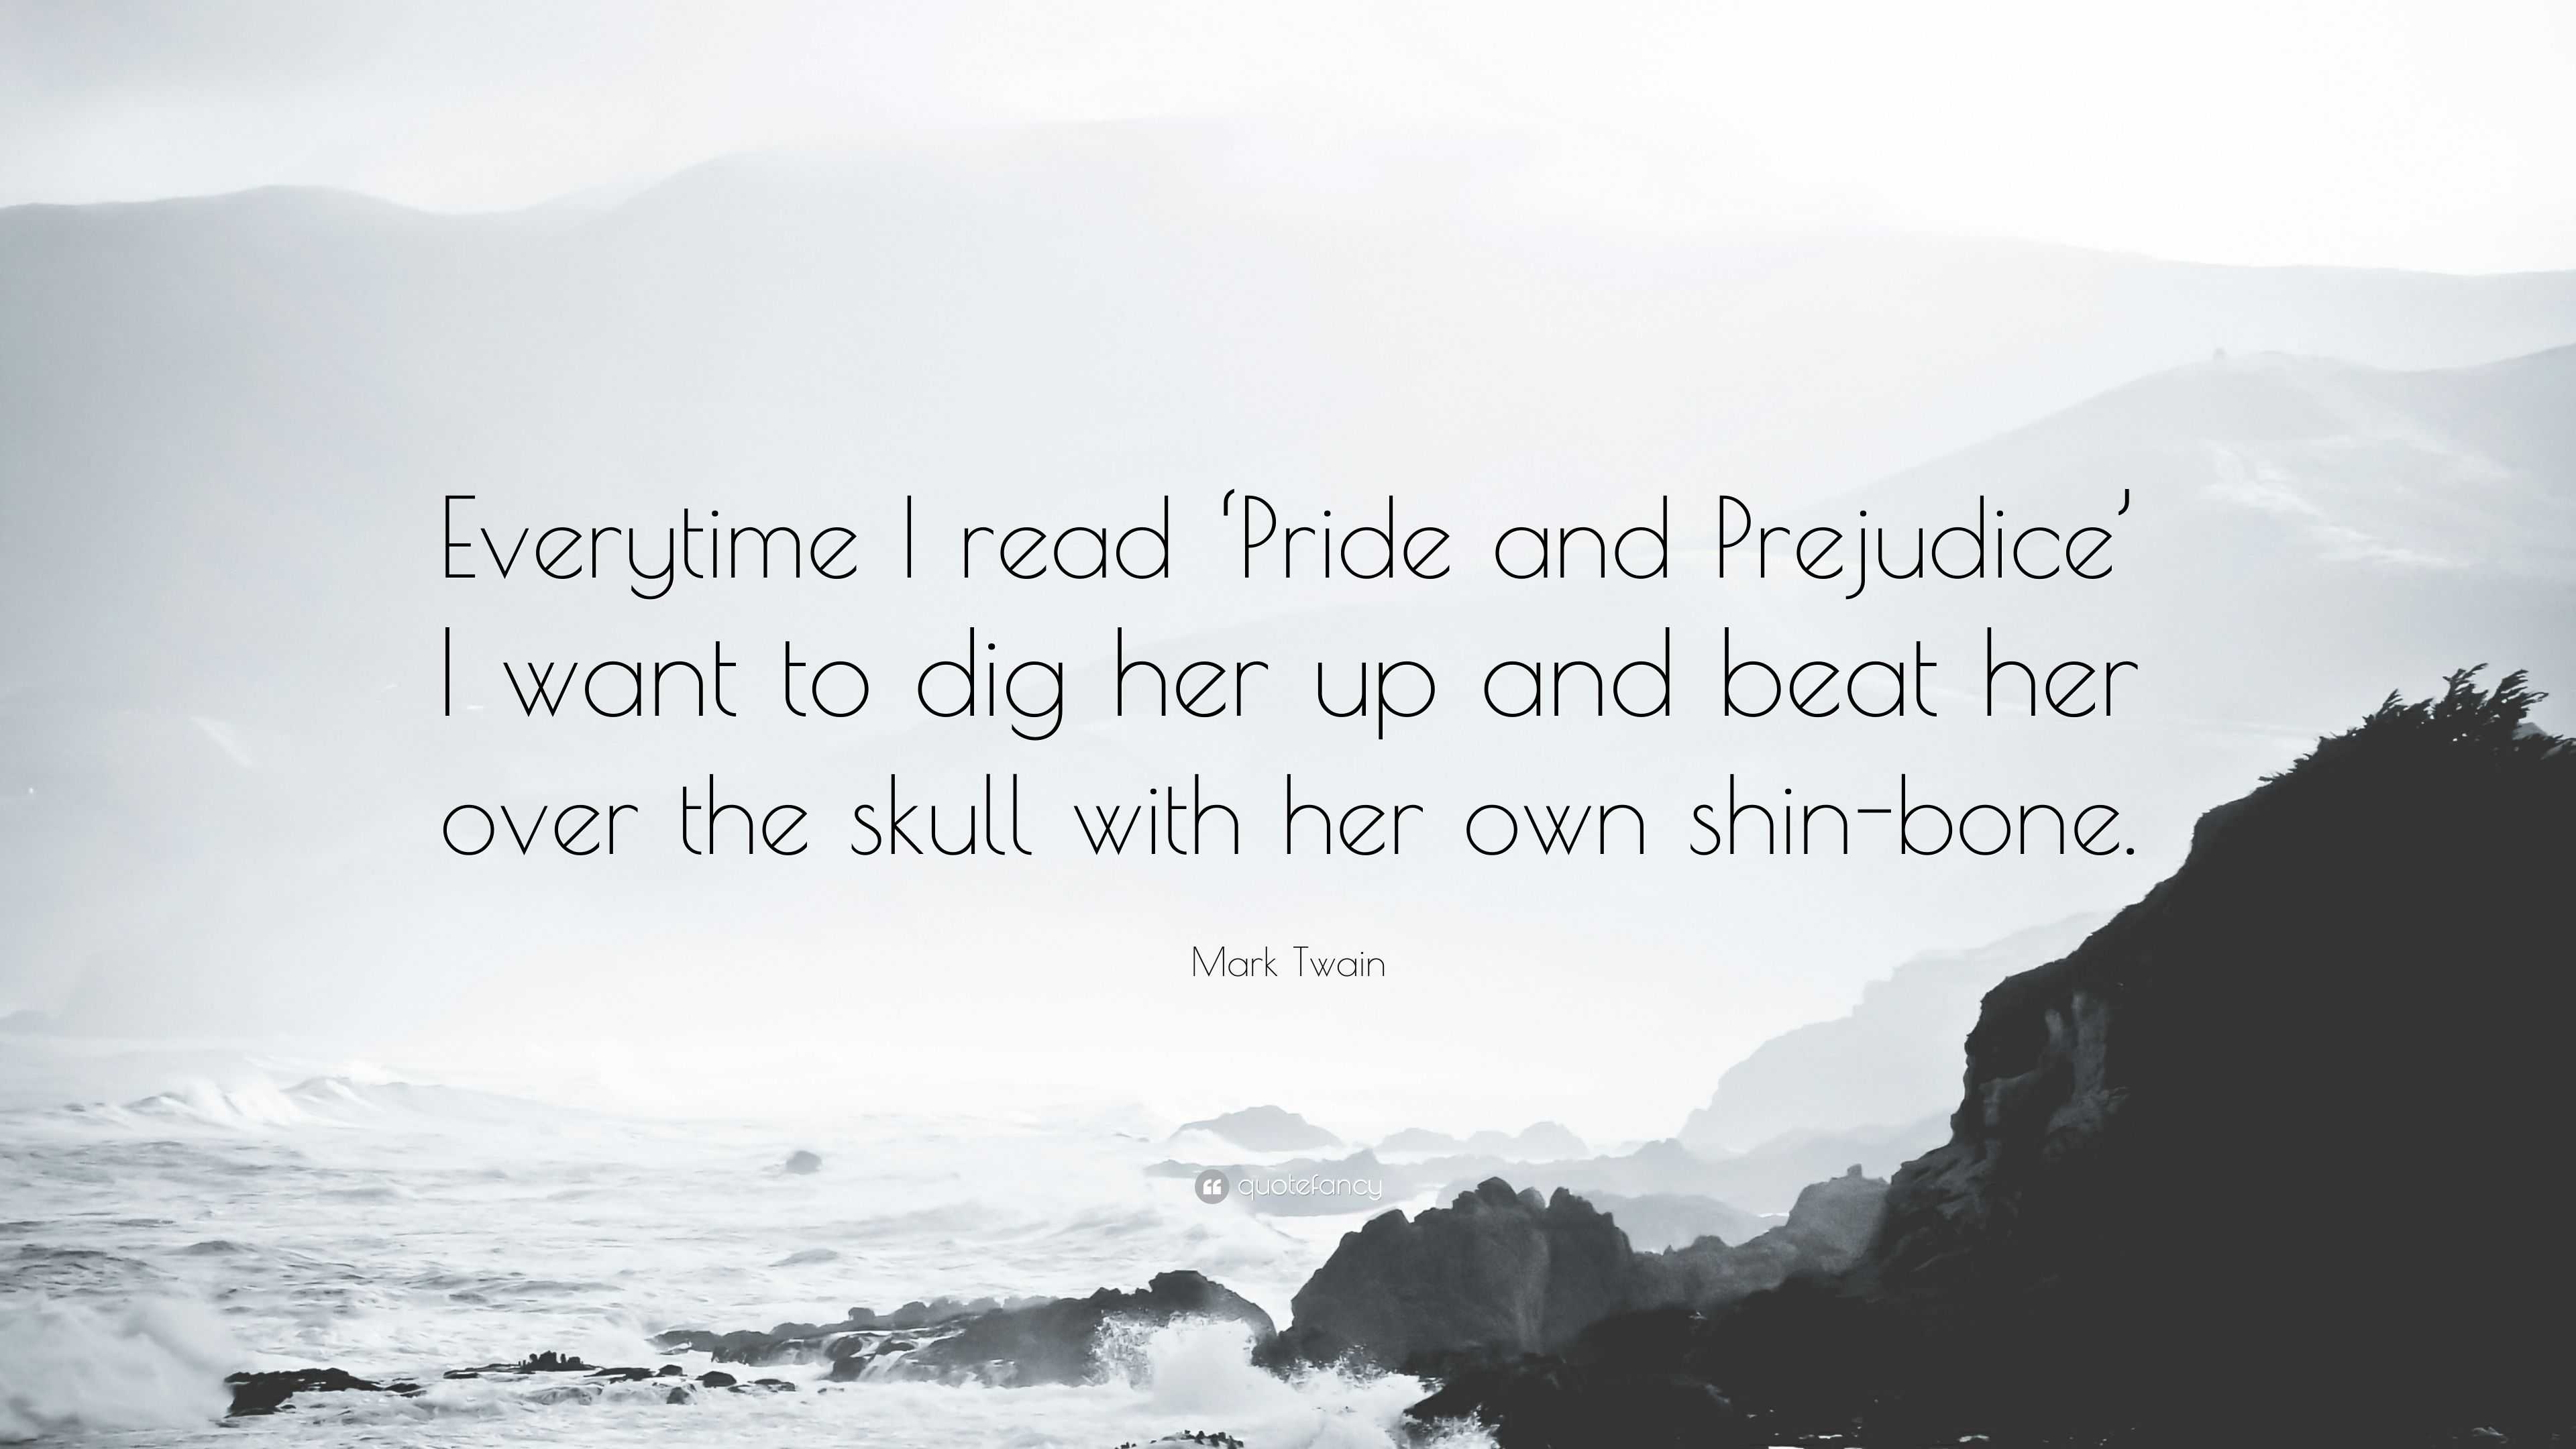 Mark Twain Quote: “Everytime I read 'Pride and Prejudice' I want to dig her  up and